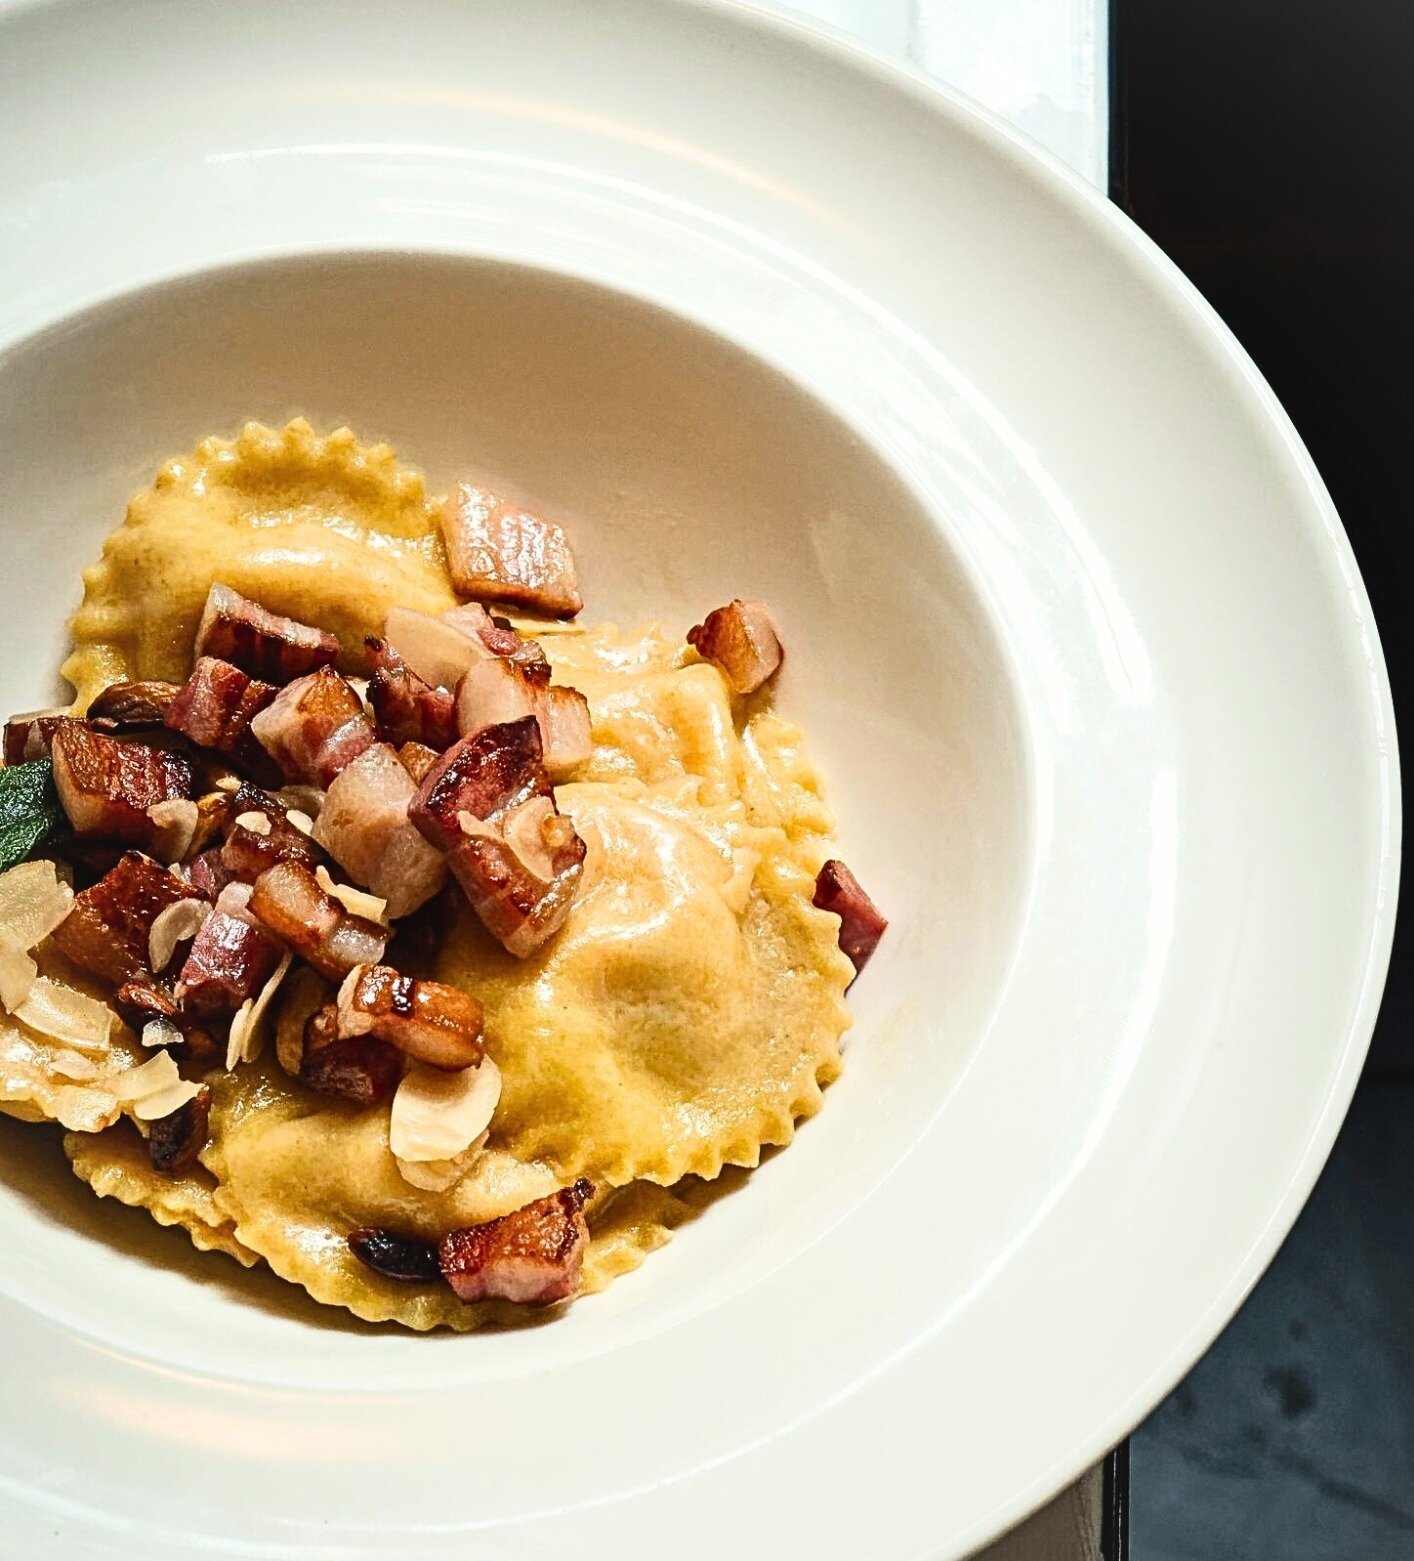 Silvia's favourite dish!

Ravioli filled with pumpkin with guanciale croccante.

(WTF is Silvia btw?)